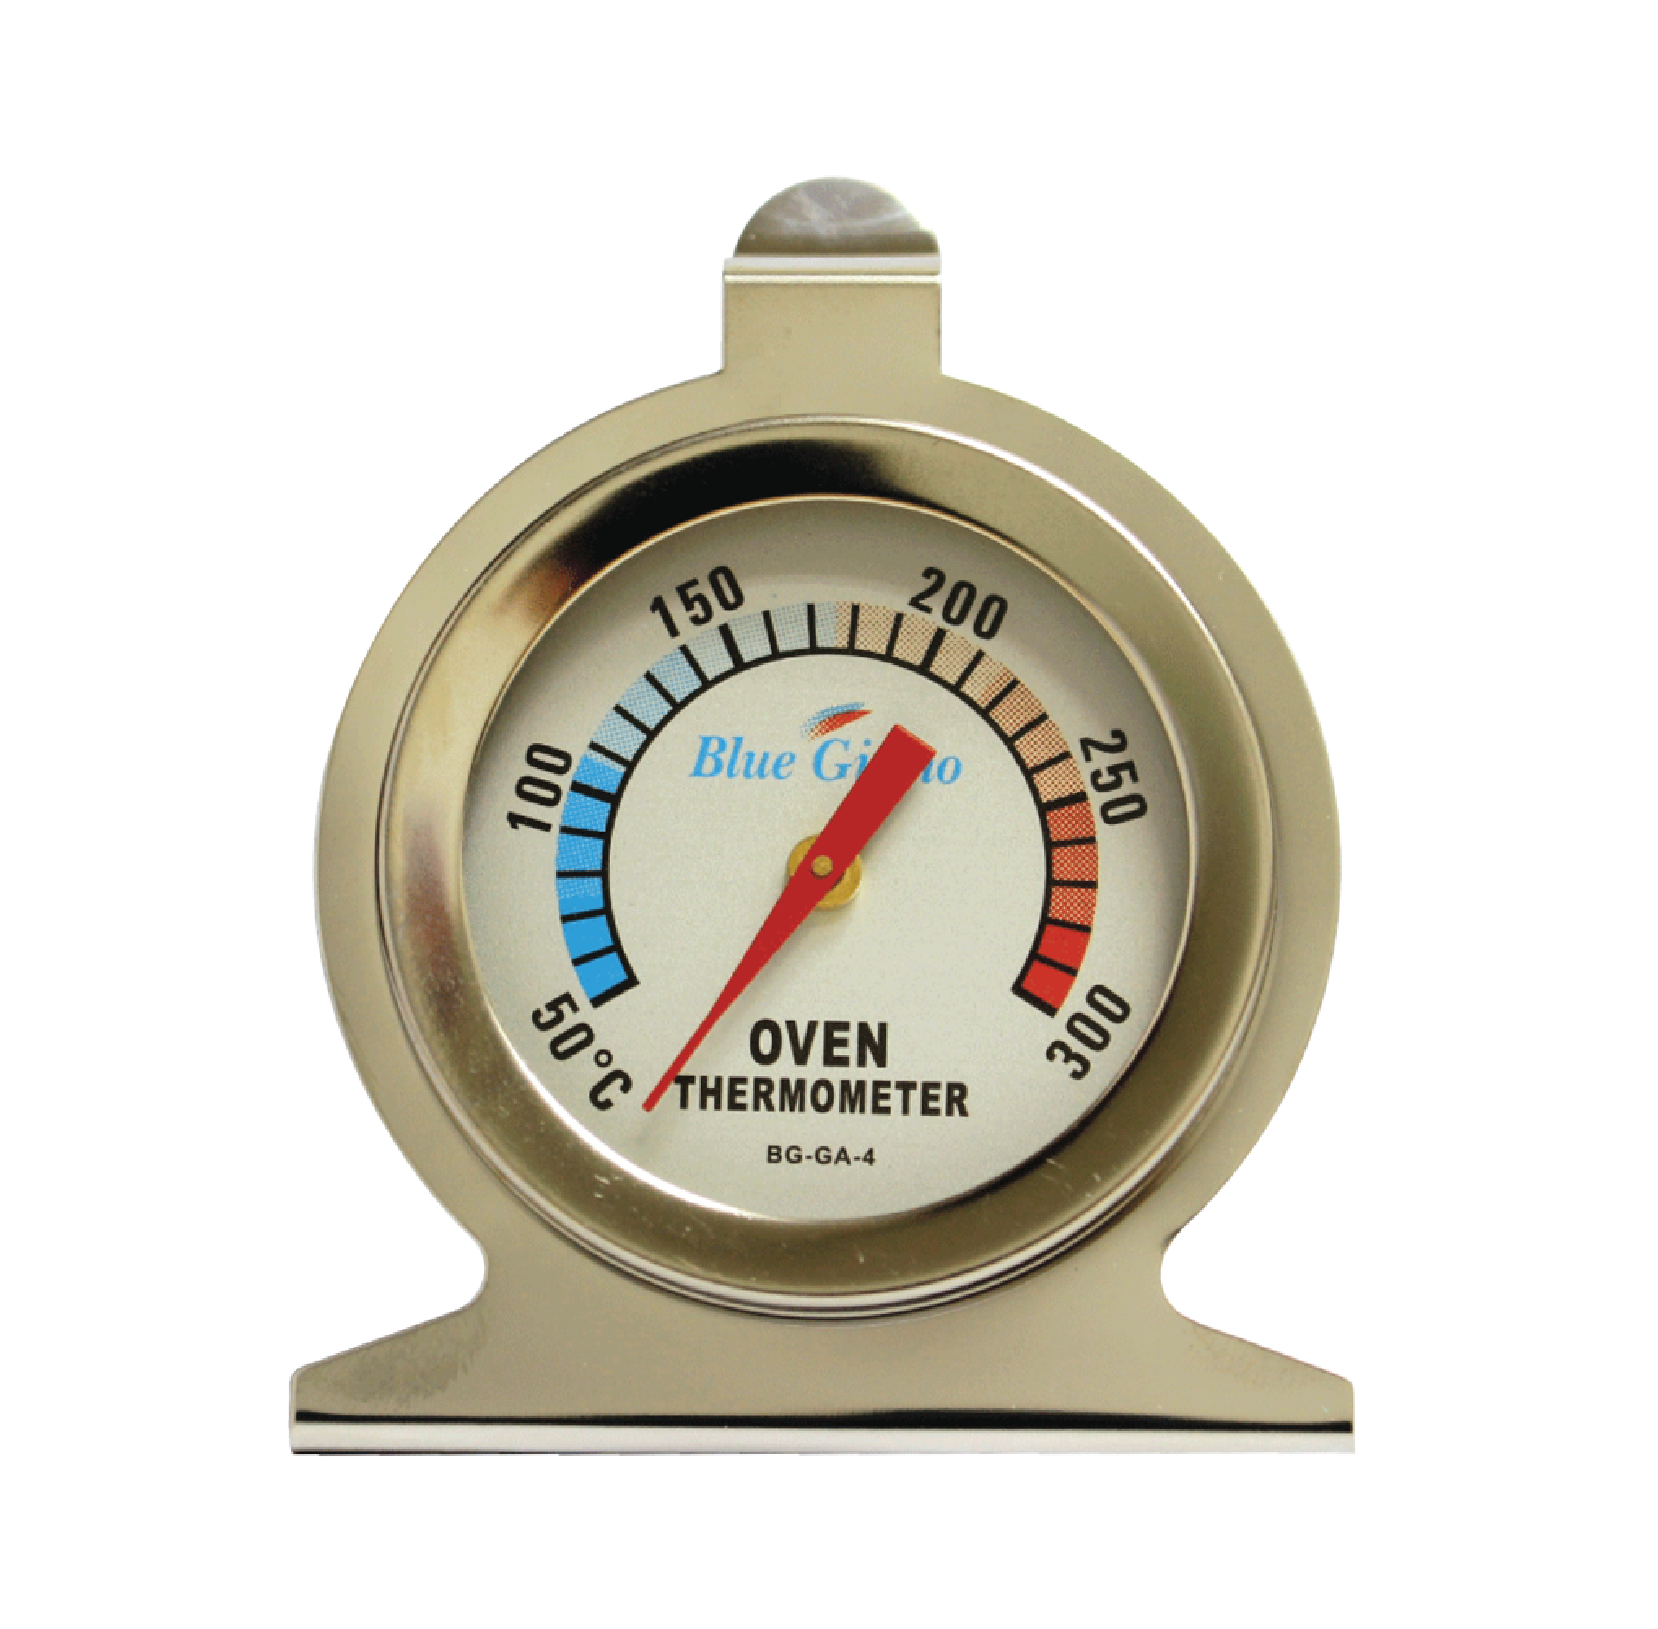 BLUE GIZMO OVEN THERMOMETER